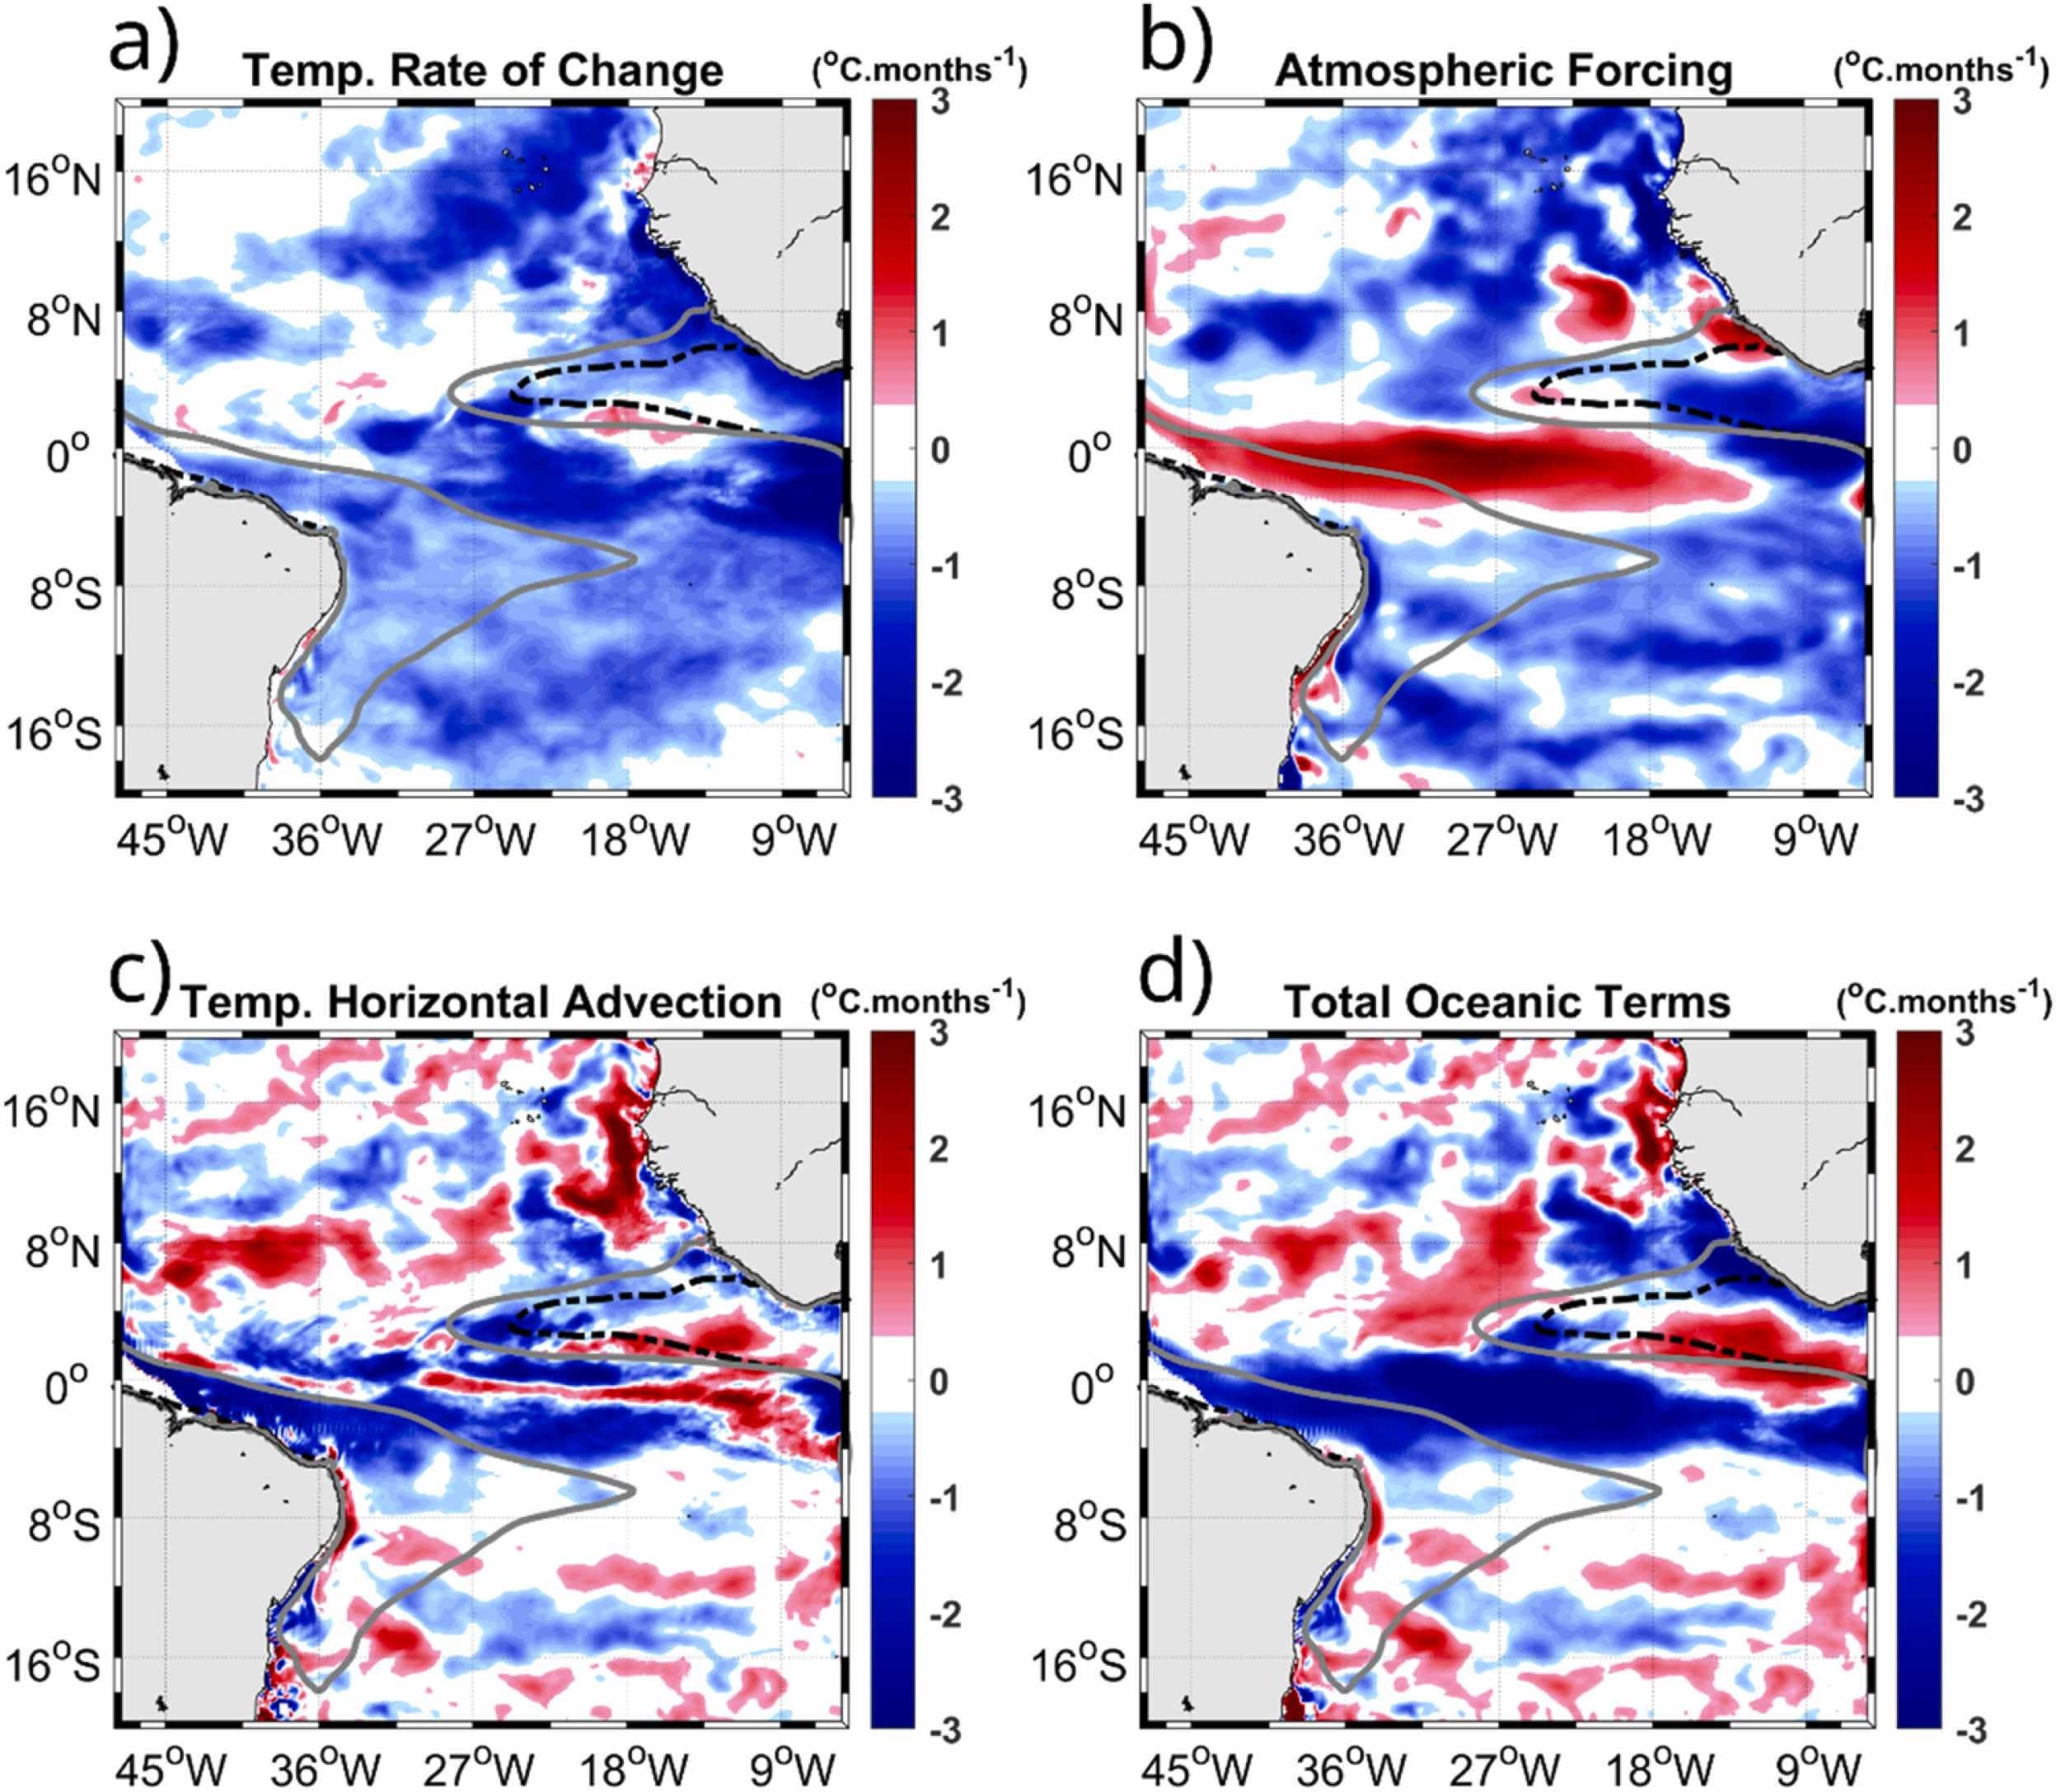 Causes and processes of two opposite climatic years in the tropical Atlantic warm pools